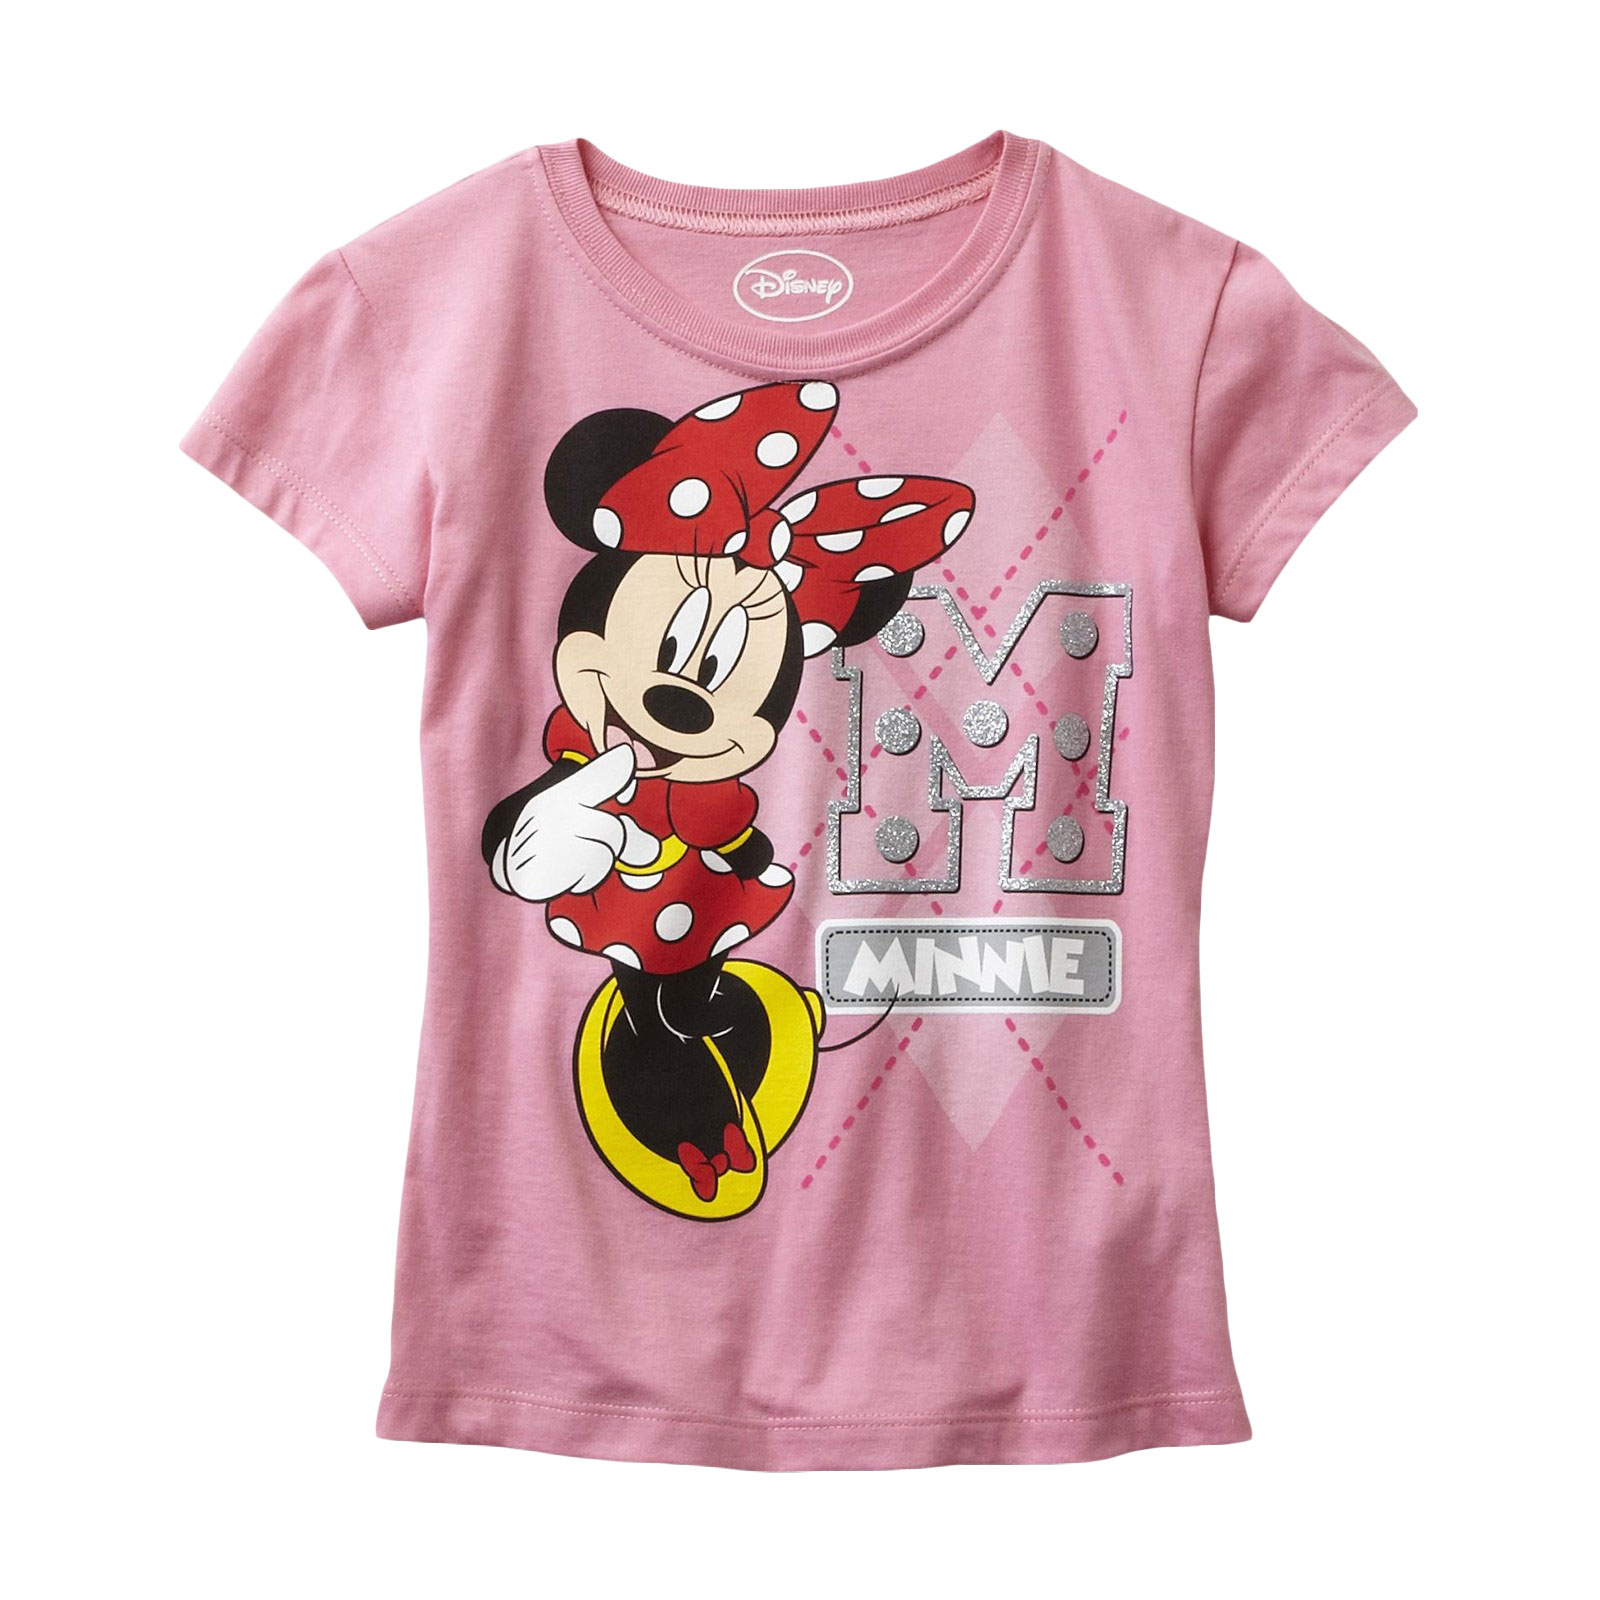 Disney Minnie Mouse Toddler Girl's Graphic T-Shirt